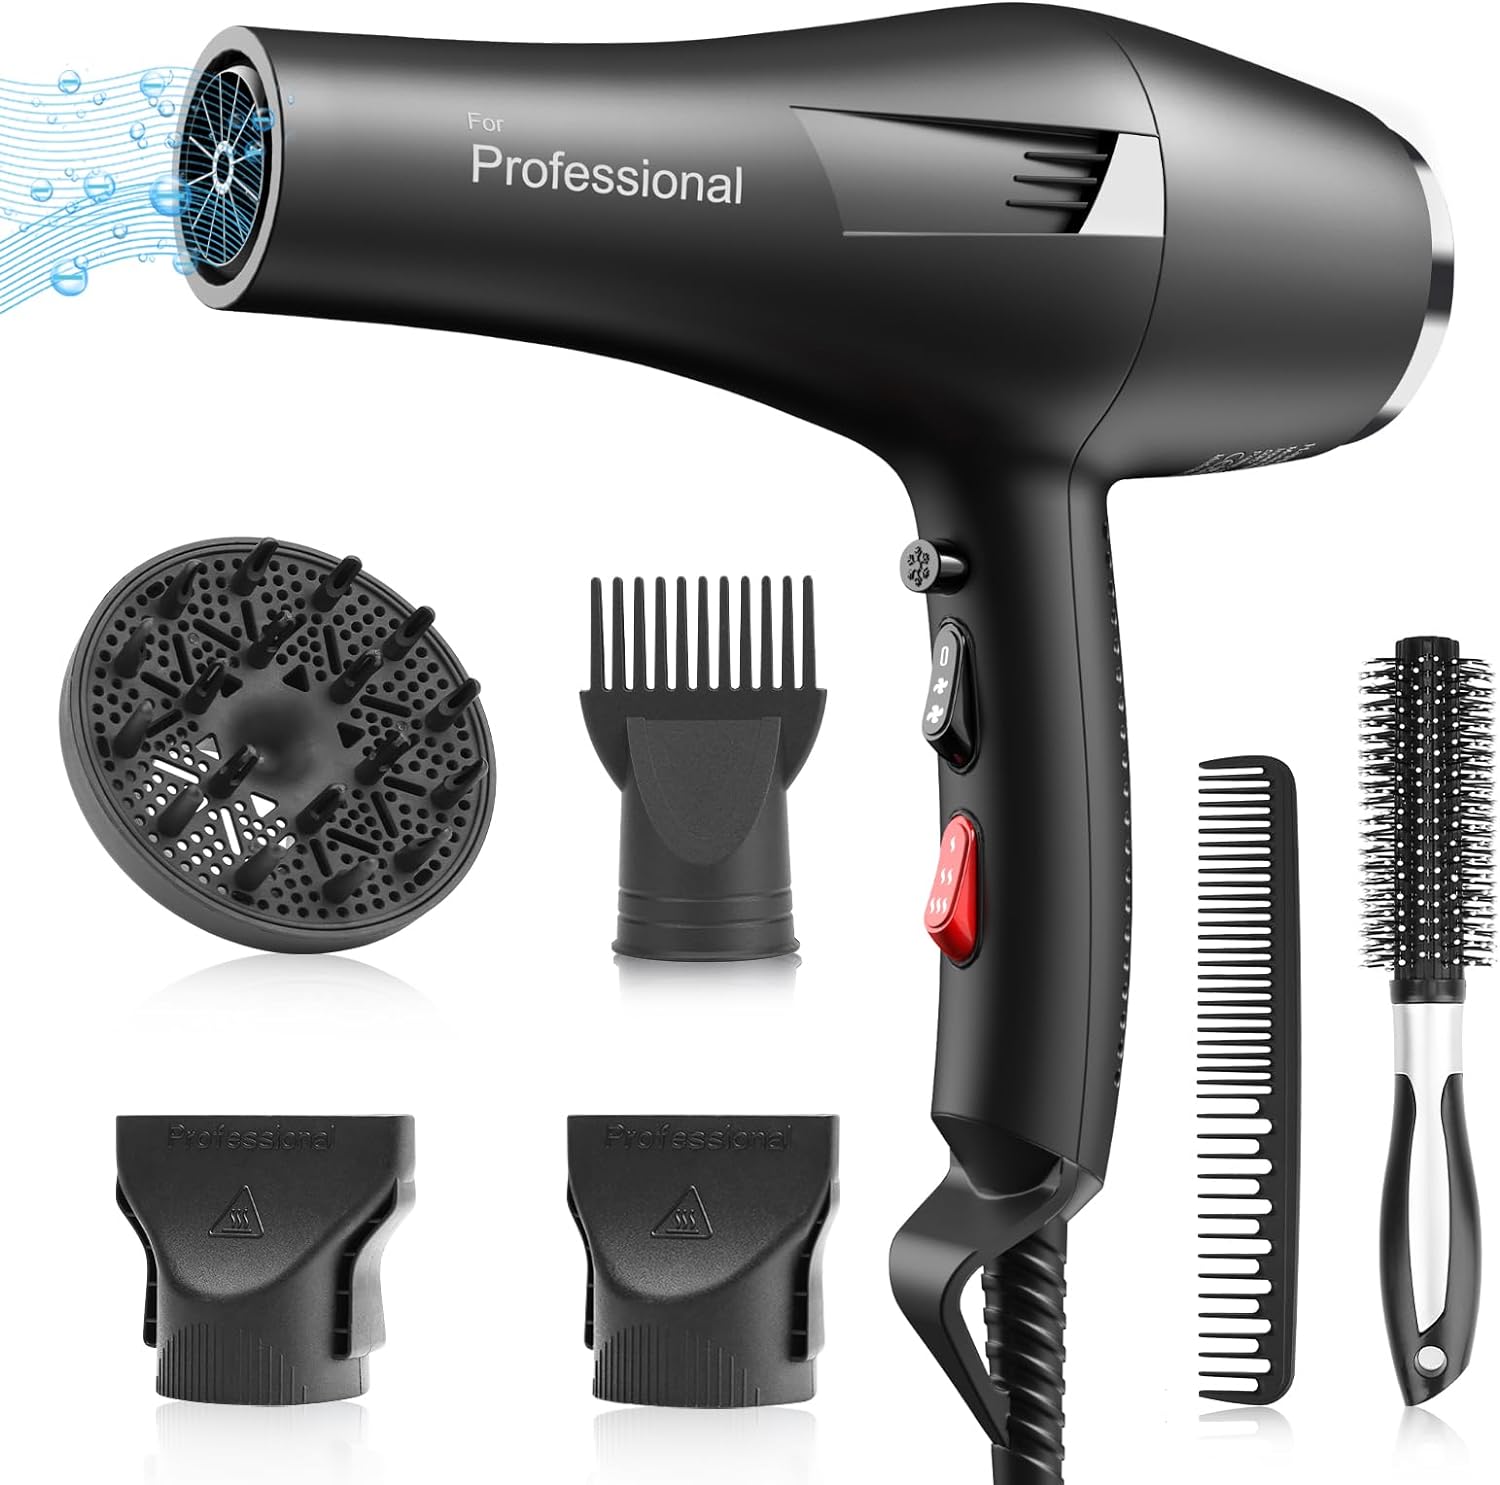 Ionic Salon Hair Dryer, Professional Blow Dryer 2200W AC Motor Fast Drying with 2 Speed, 3 Heat Setting, Cool Button, with Diffuser, Nozzle, Concentrator Comb for Curly and Straight Hair